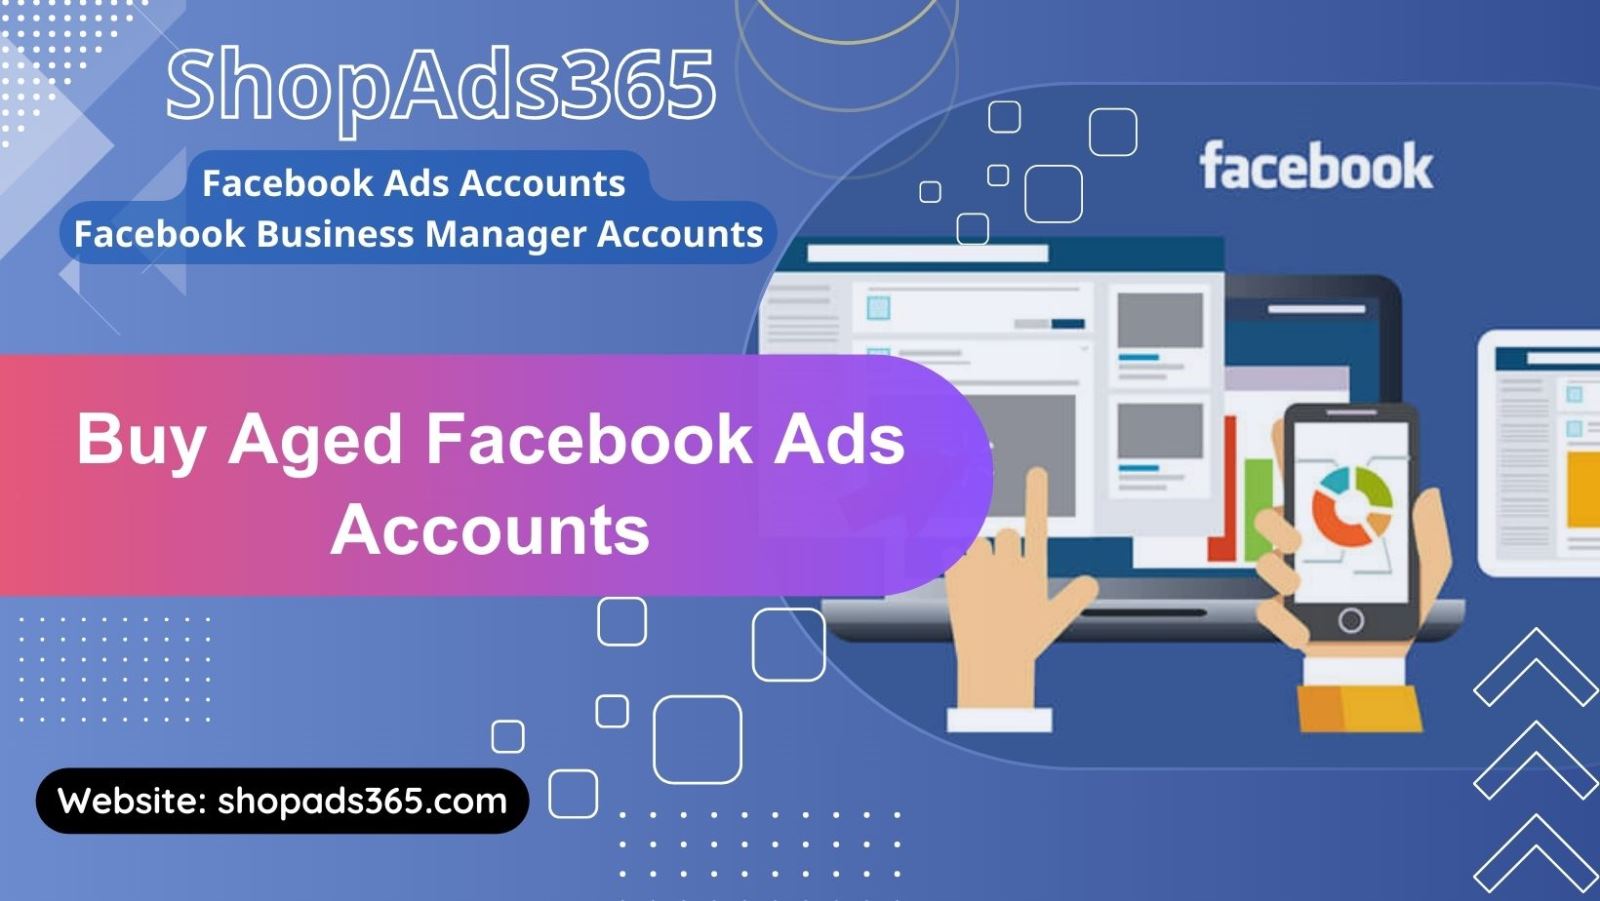 Buy Aged Facebook Ads Accounts